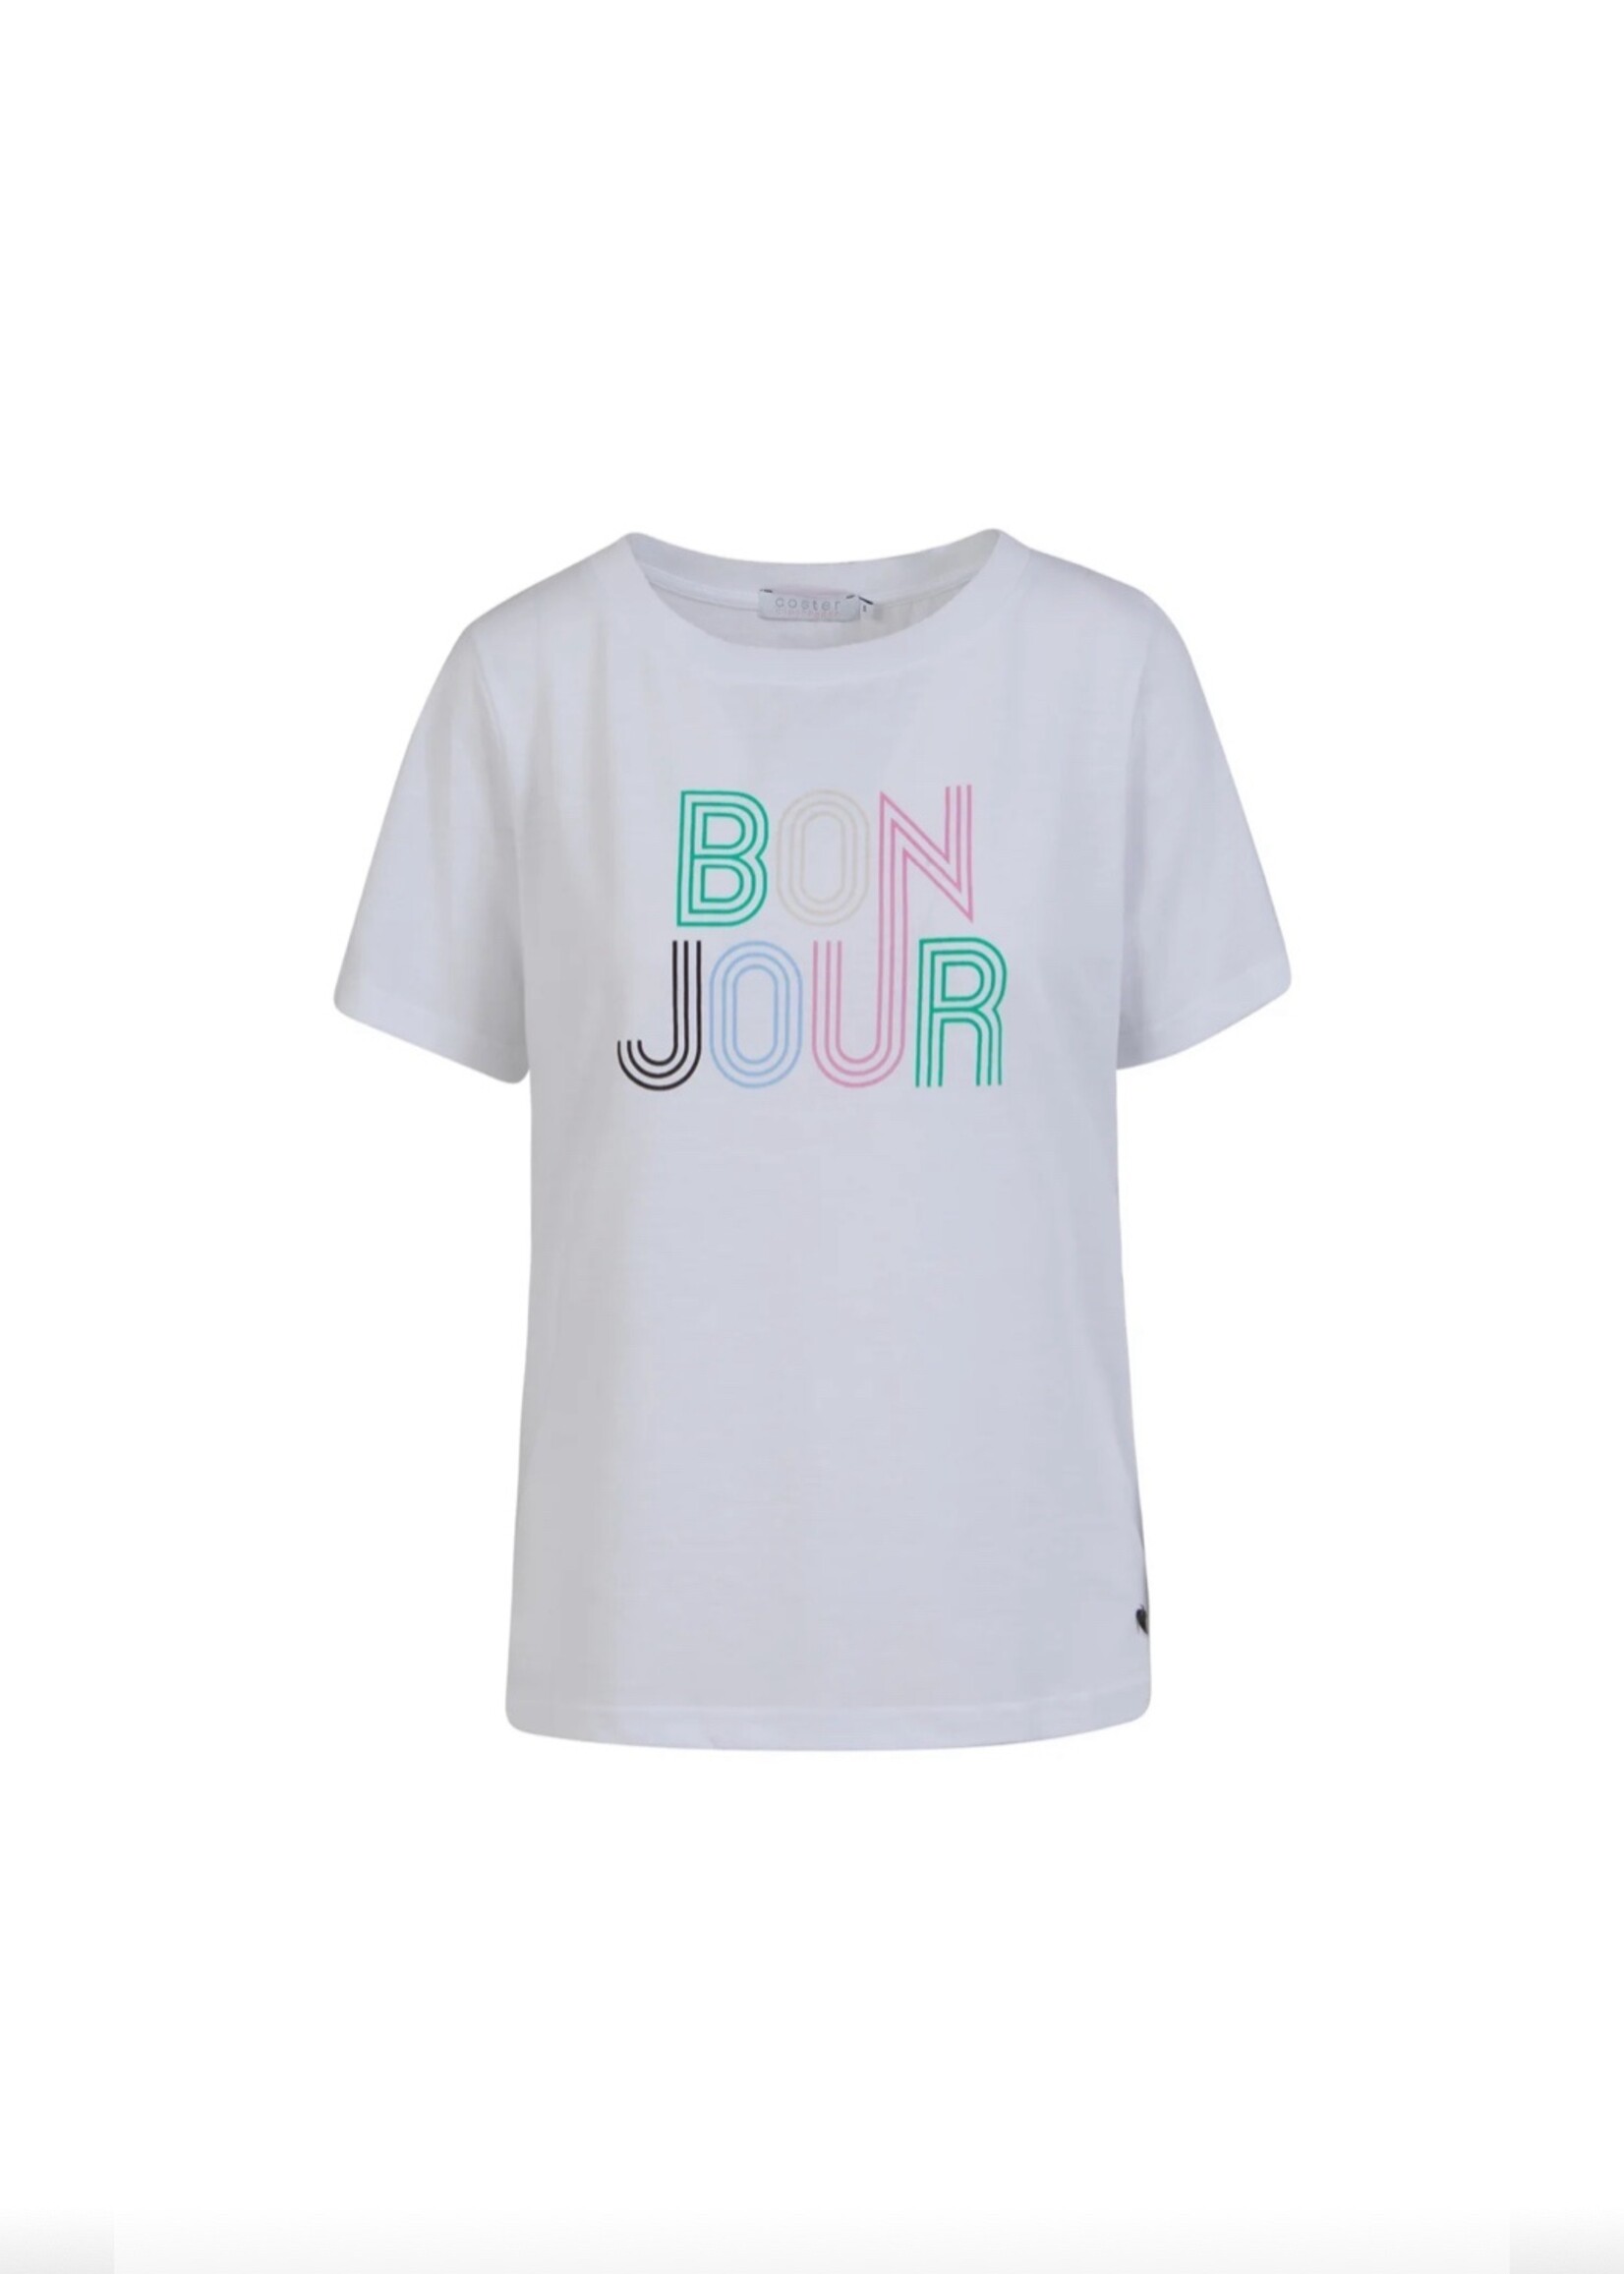 By Coster Copenhagen T-Shirt with Bonjour print